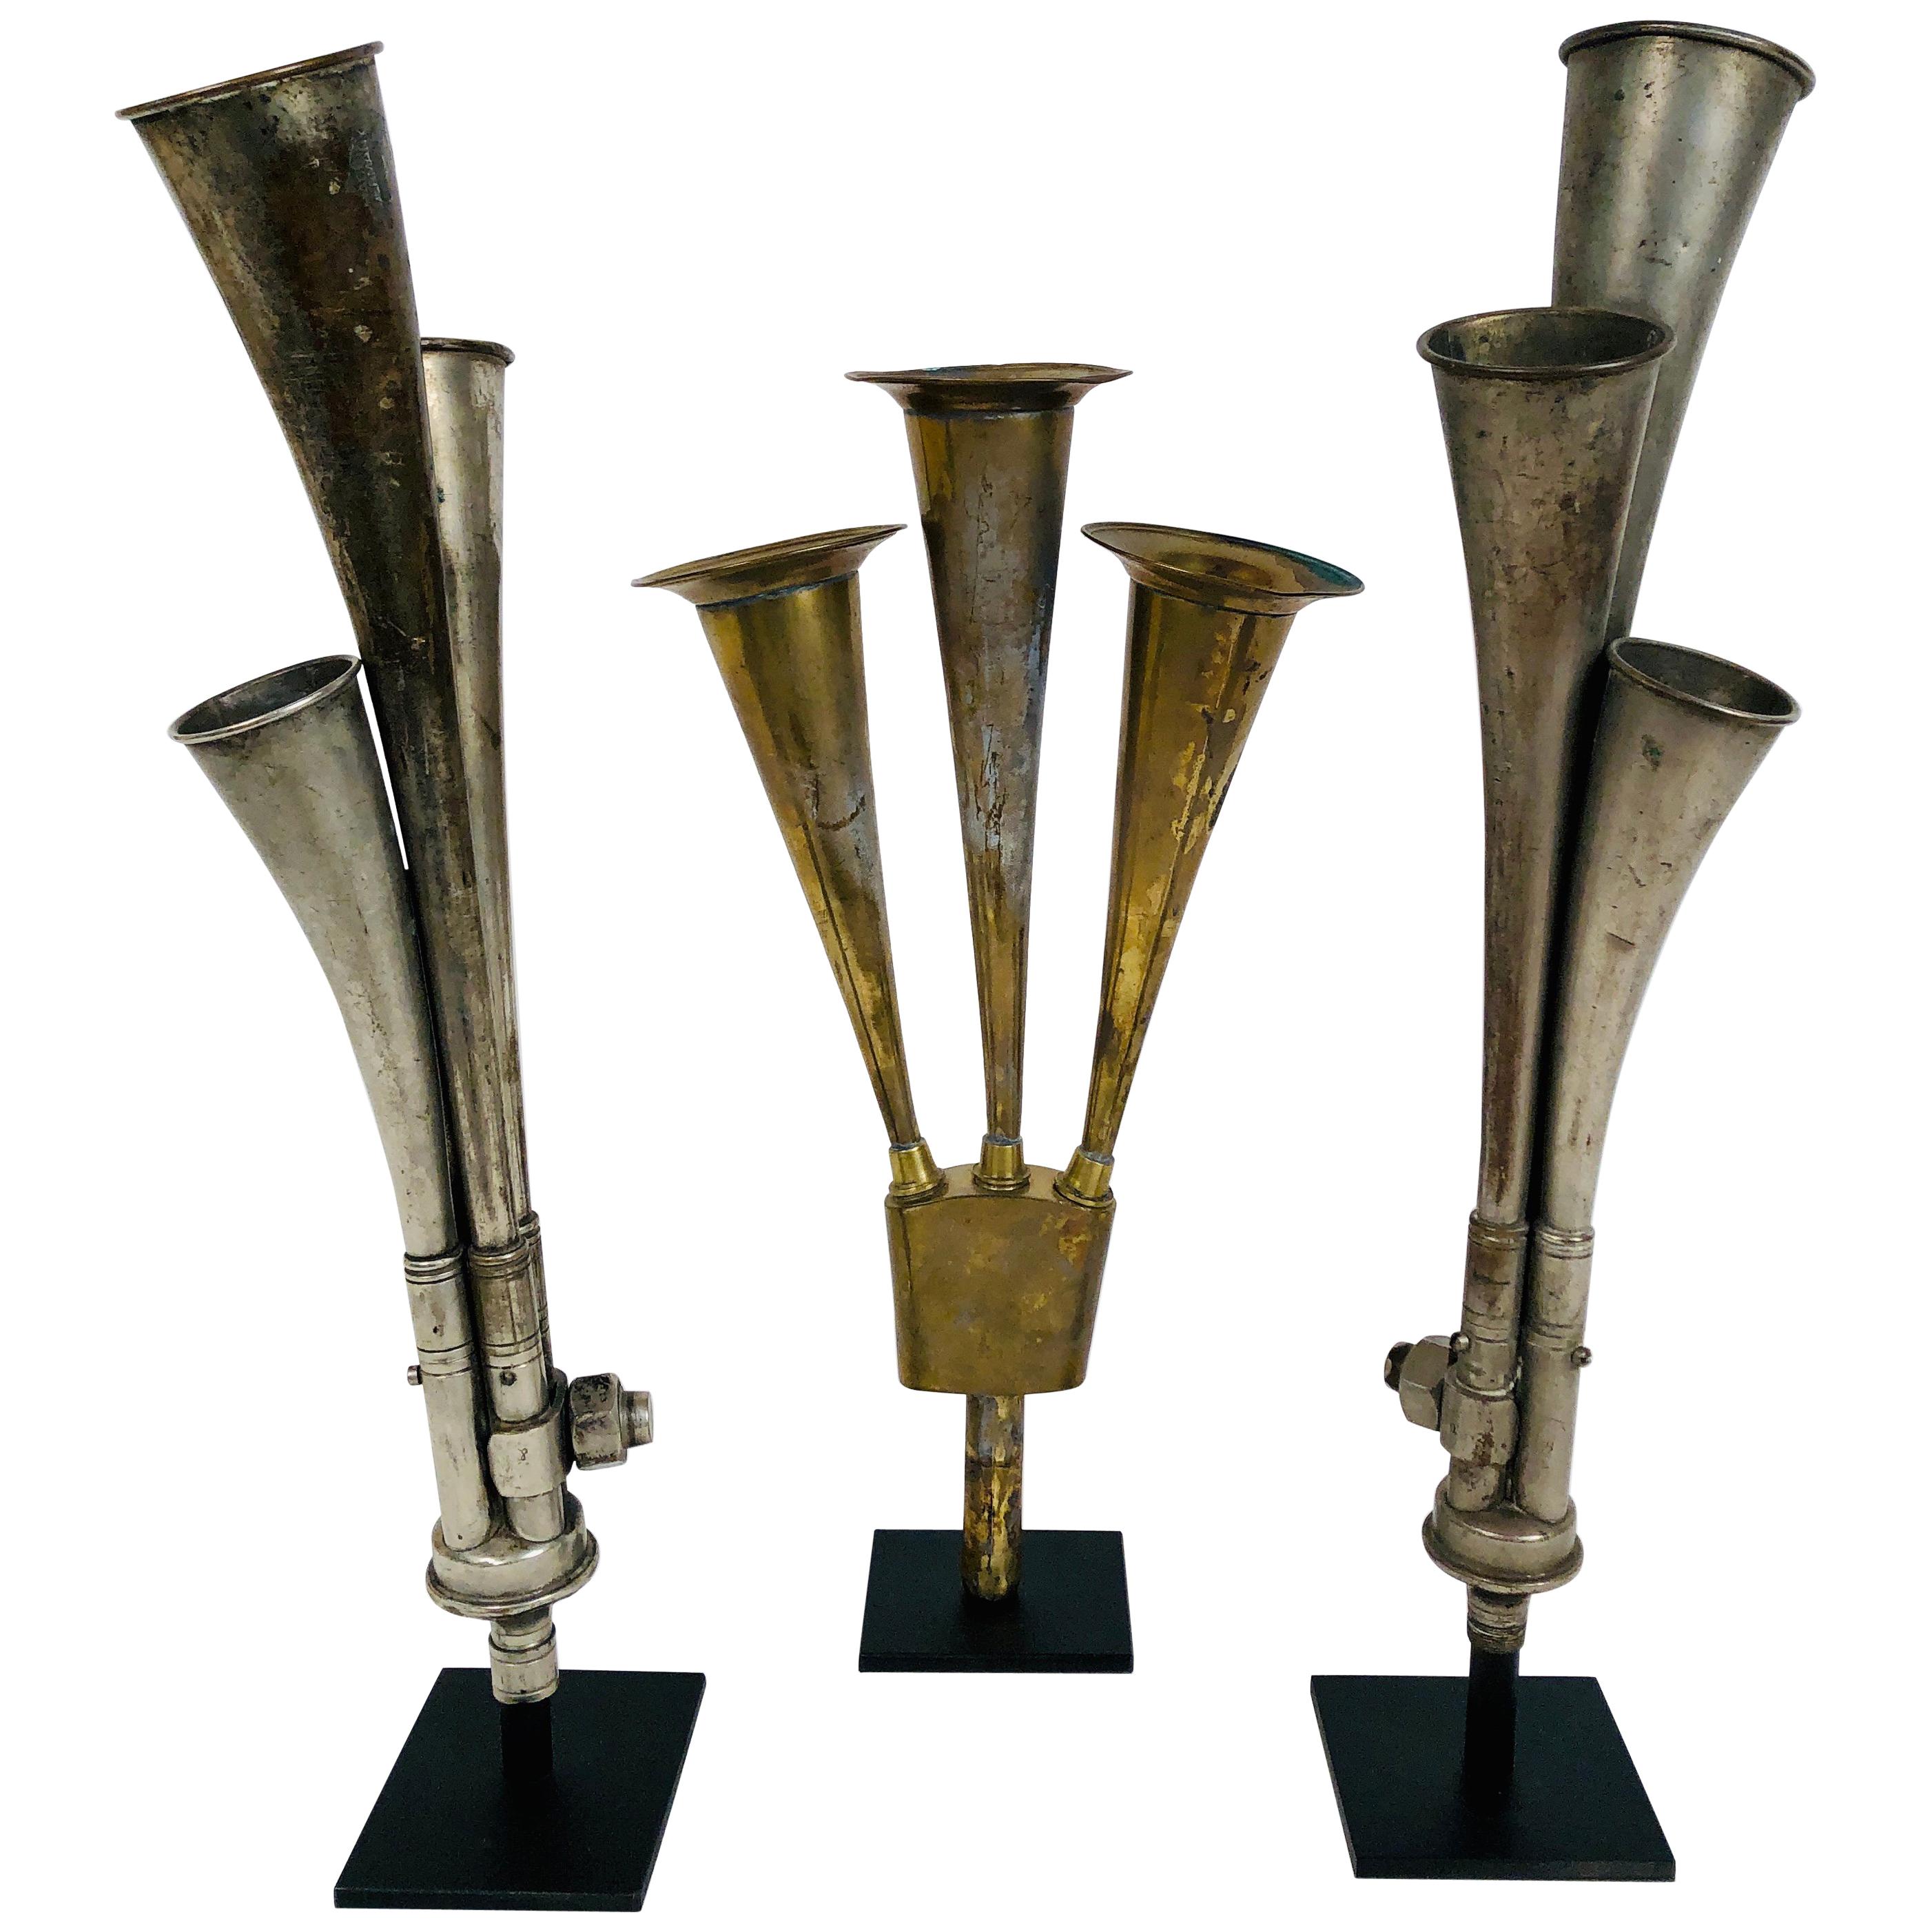 Antique Multi Tone Car Horn Collection with Custom Made Stands